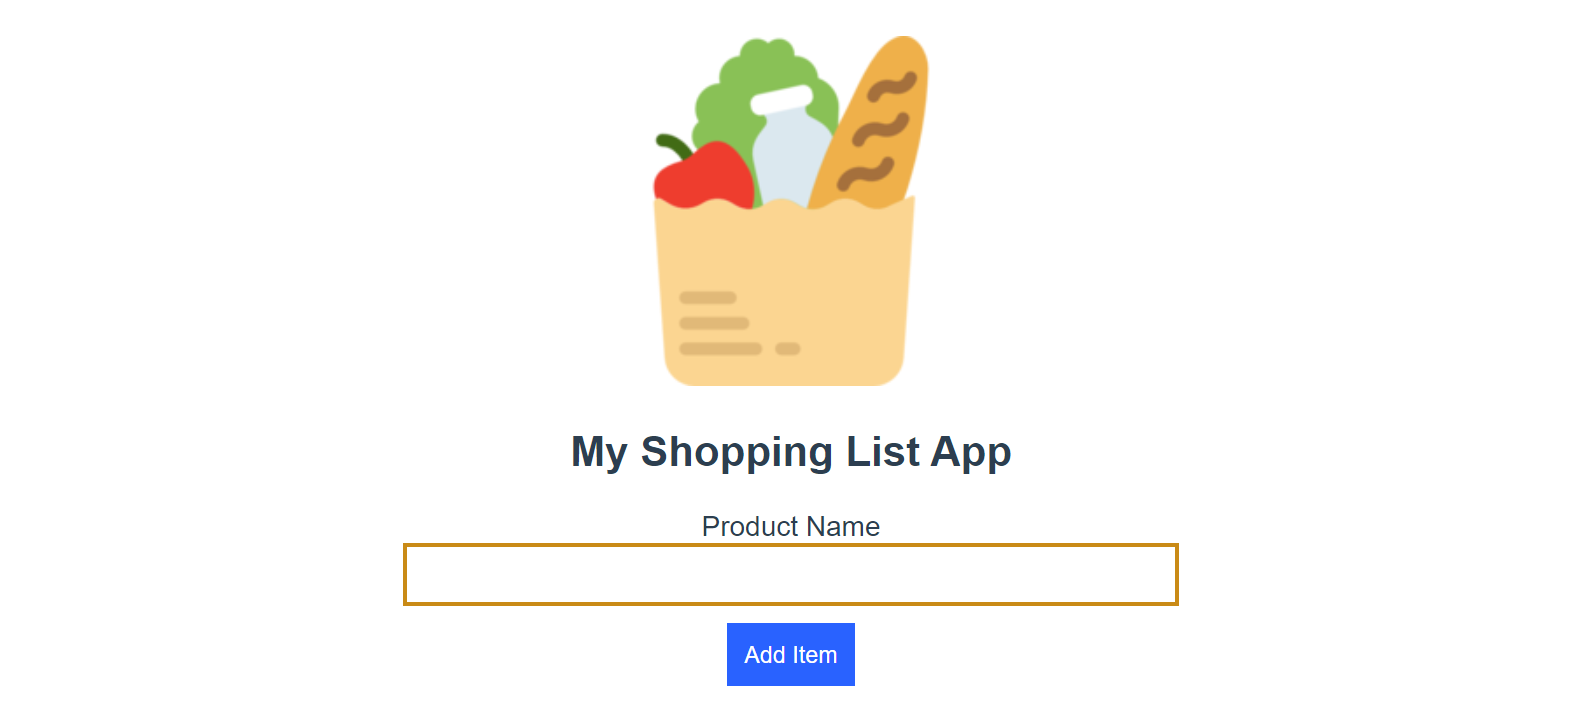 The shopping app ready to go